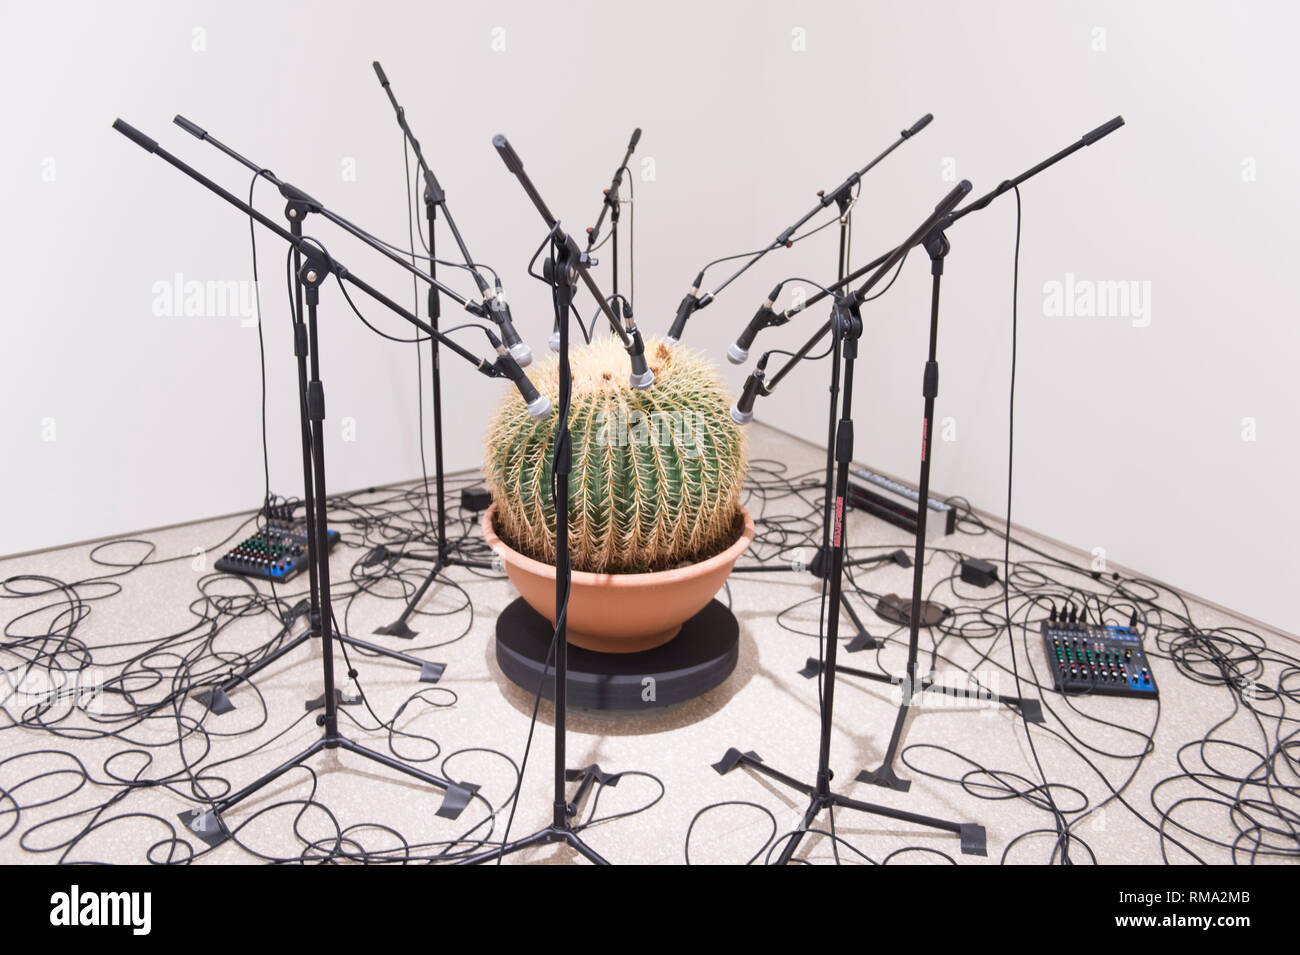 RA, London, UK. 14 February, 2019. Premiums Interim Projects exhibition in the new Weston Studio and The McAulay Gallery at the Royal Academy of Arts, previewing postgraduate students  from the UK’s longest established art school. Image: Clara Hastrup. Echinocactus Grusonii: Polyphonia Fibonacci, 2019. Credit: Malcolm Park/Alamy Live News. Stock Photo